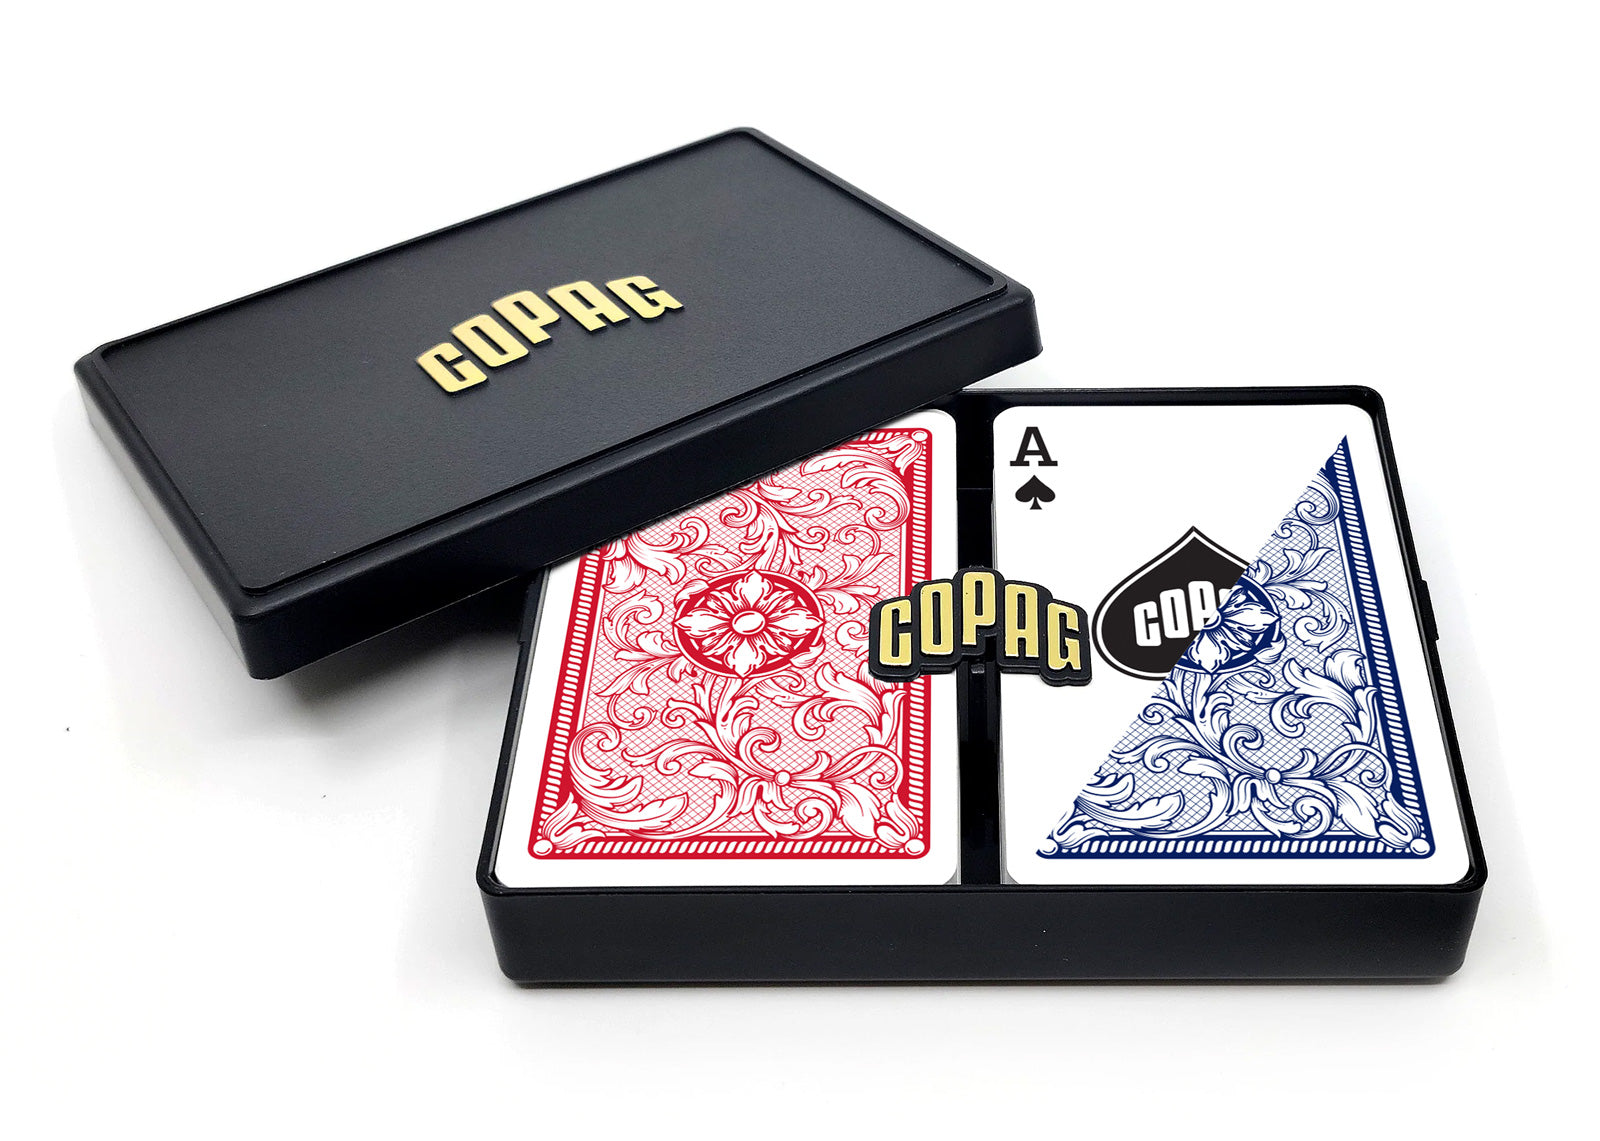 Double Plastic Box for 2 Decks of Playing Cards